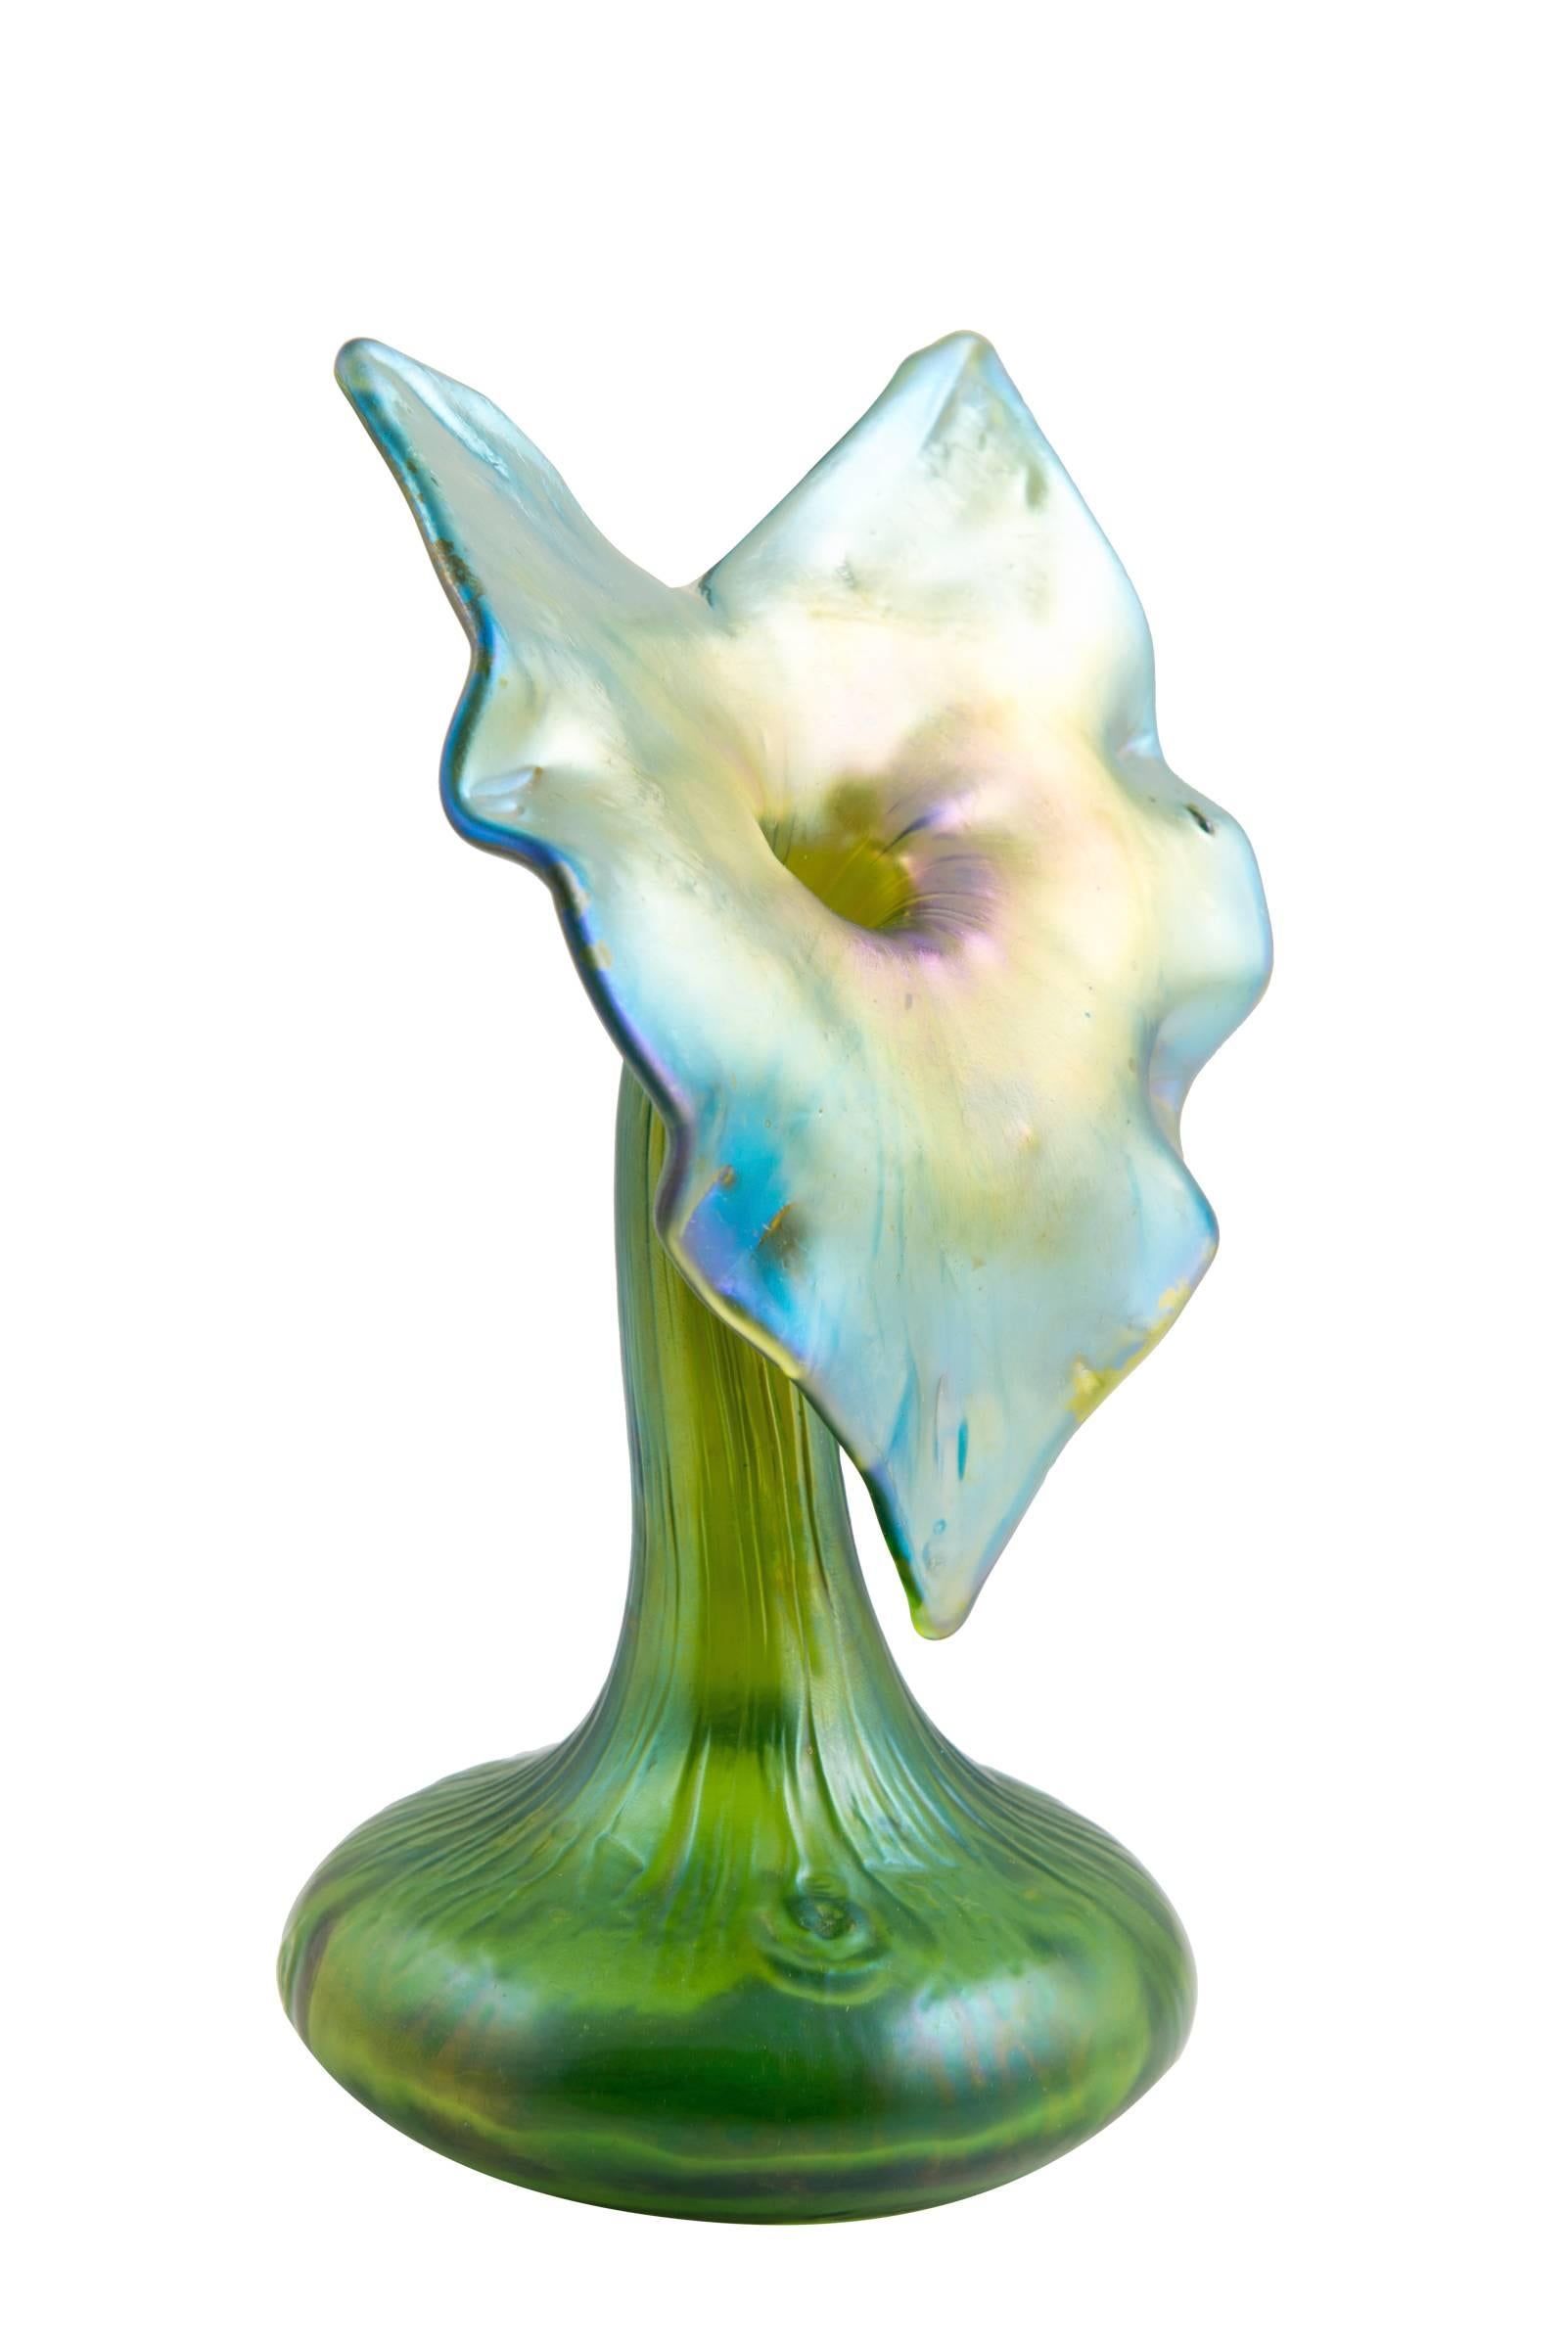 Organic shapes were highly appreciated by the buying audience and the designers of the Loetz manufacture invented a high number of floral objects. Jack-in-the-pulpit vases had great success during the early times of the Loetz enterprise and were